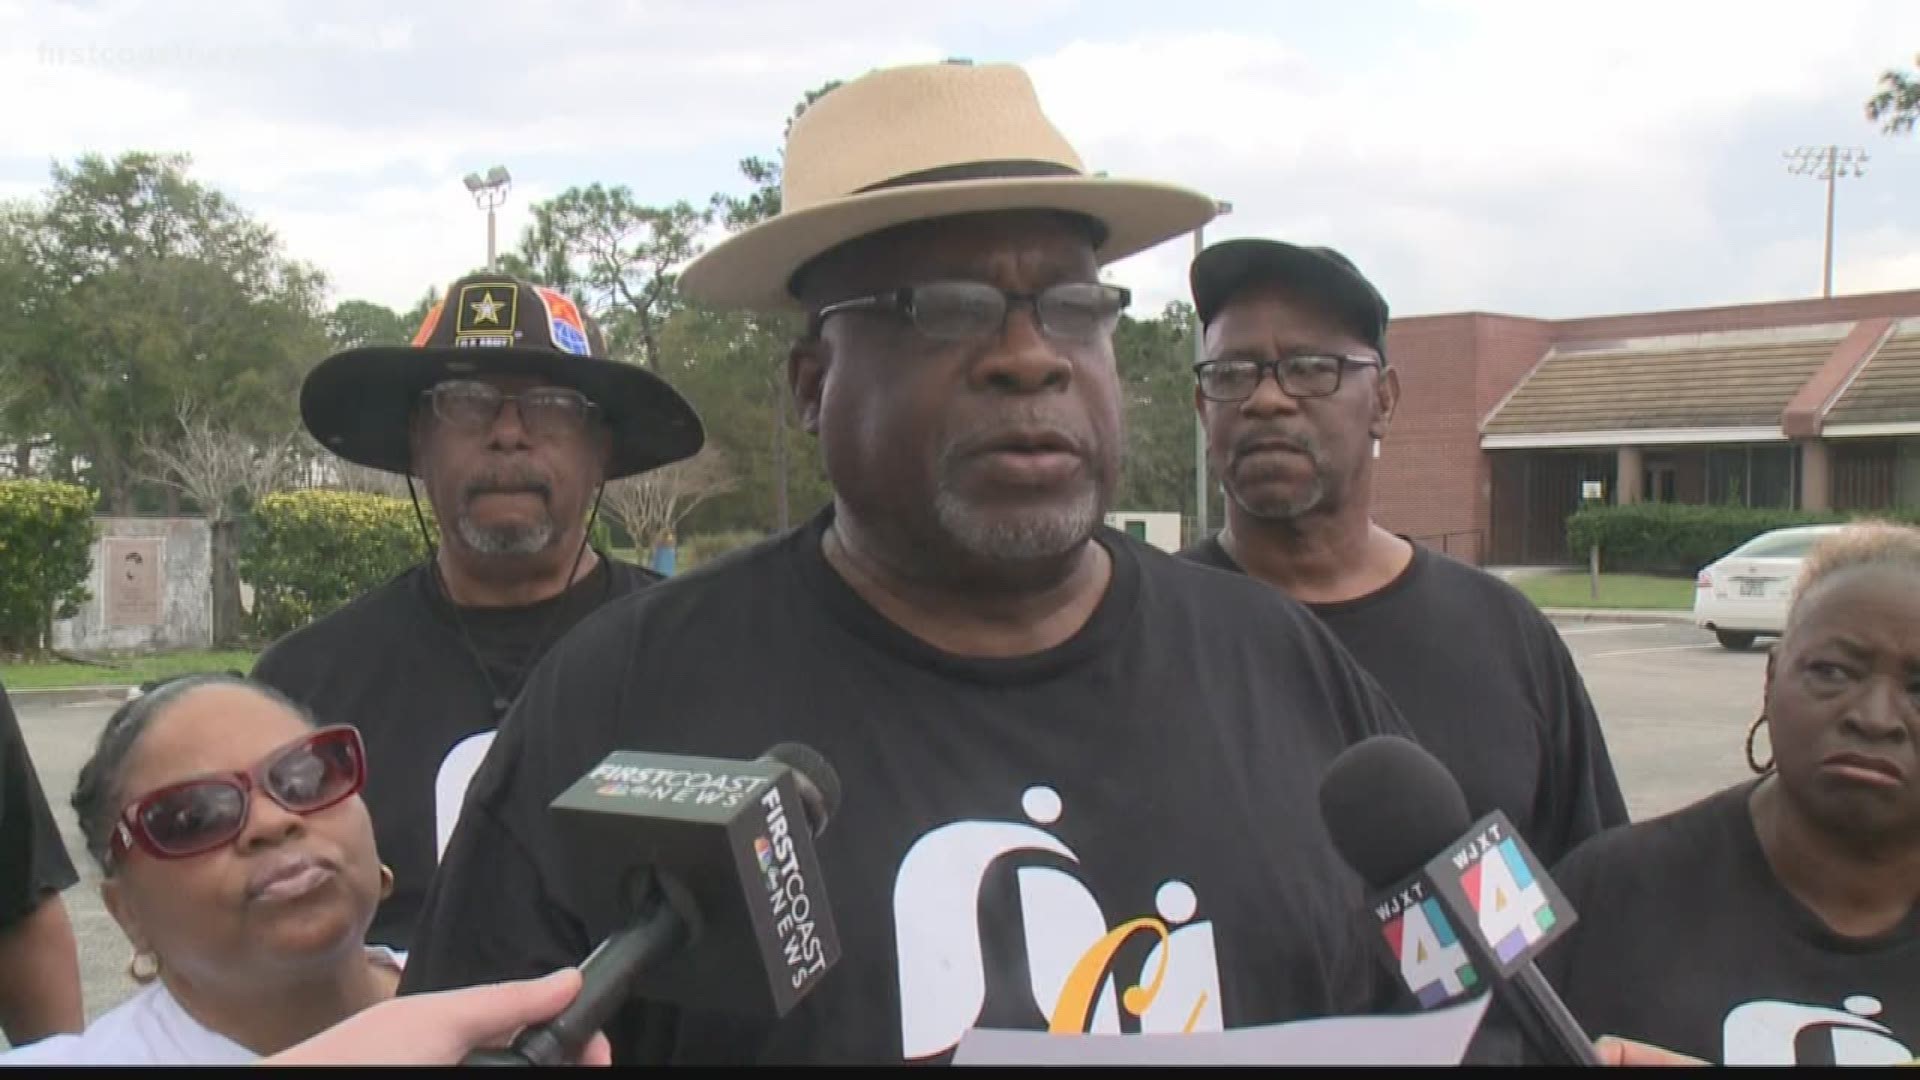 The Northside Coalition of Jacksonville wants to prove that the community's issues can be solved without gun violence and without the National Guard.